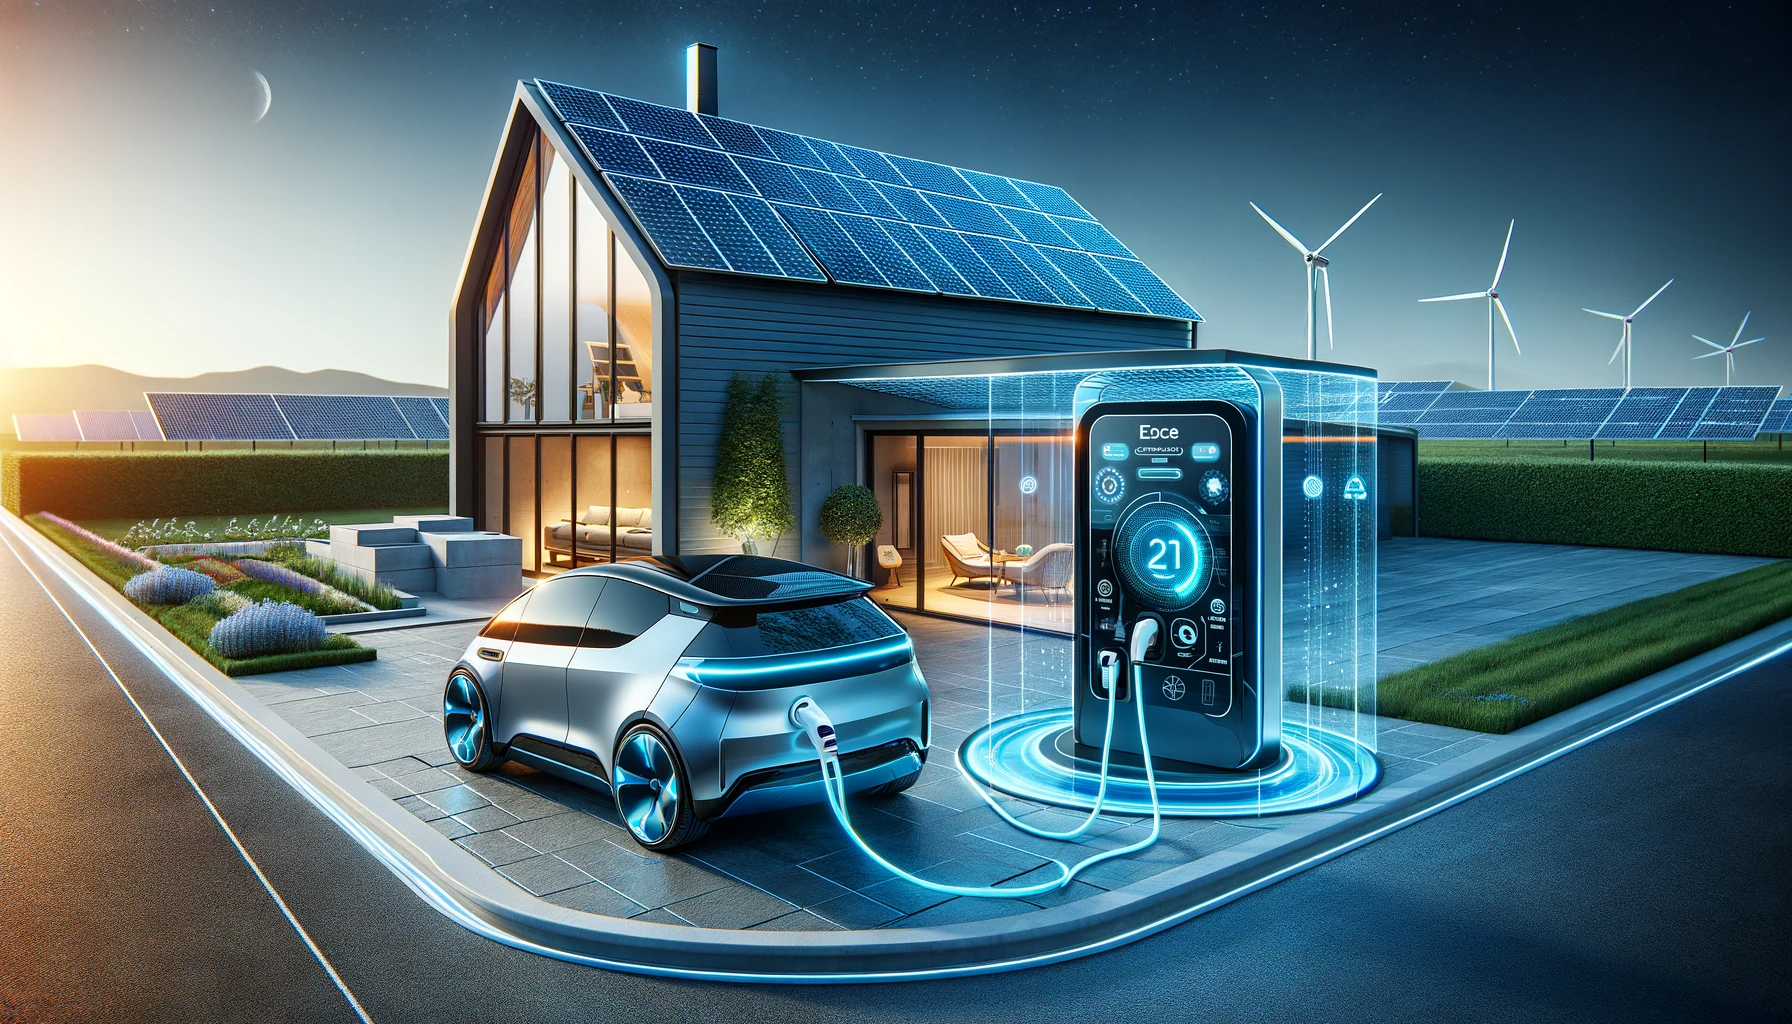 A futuristic image showing potential advancements in home EV charging, like integration with renewable energy and smart charging technologies.